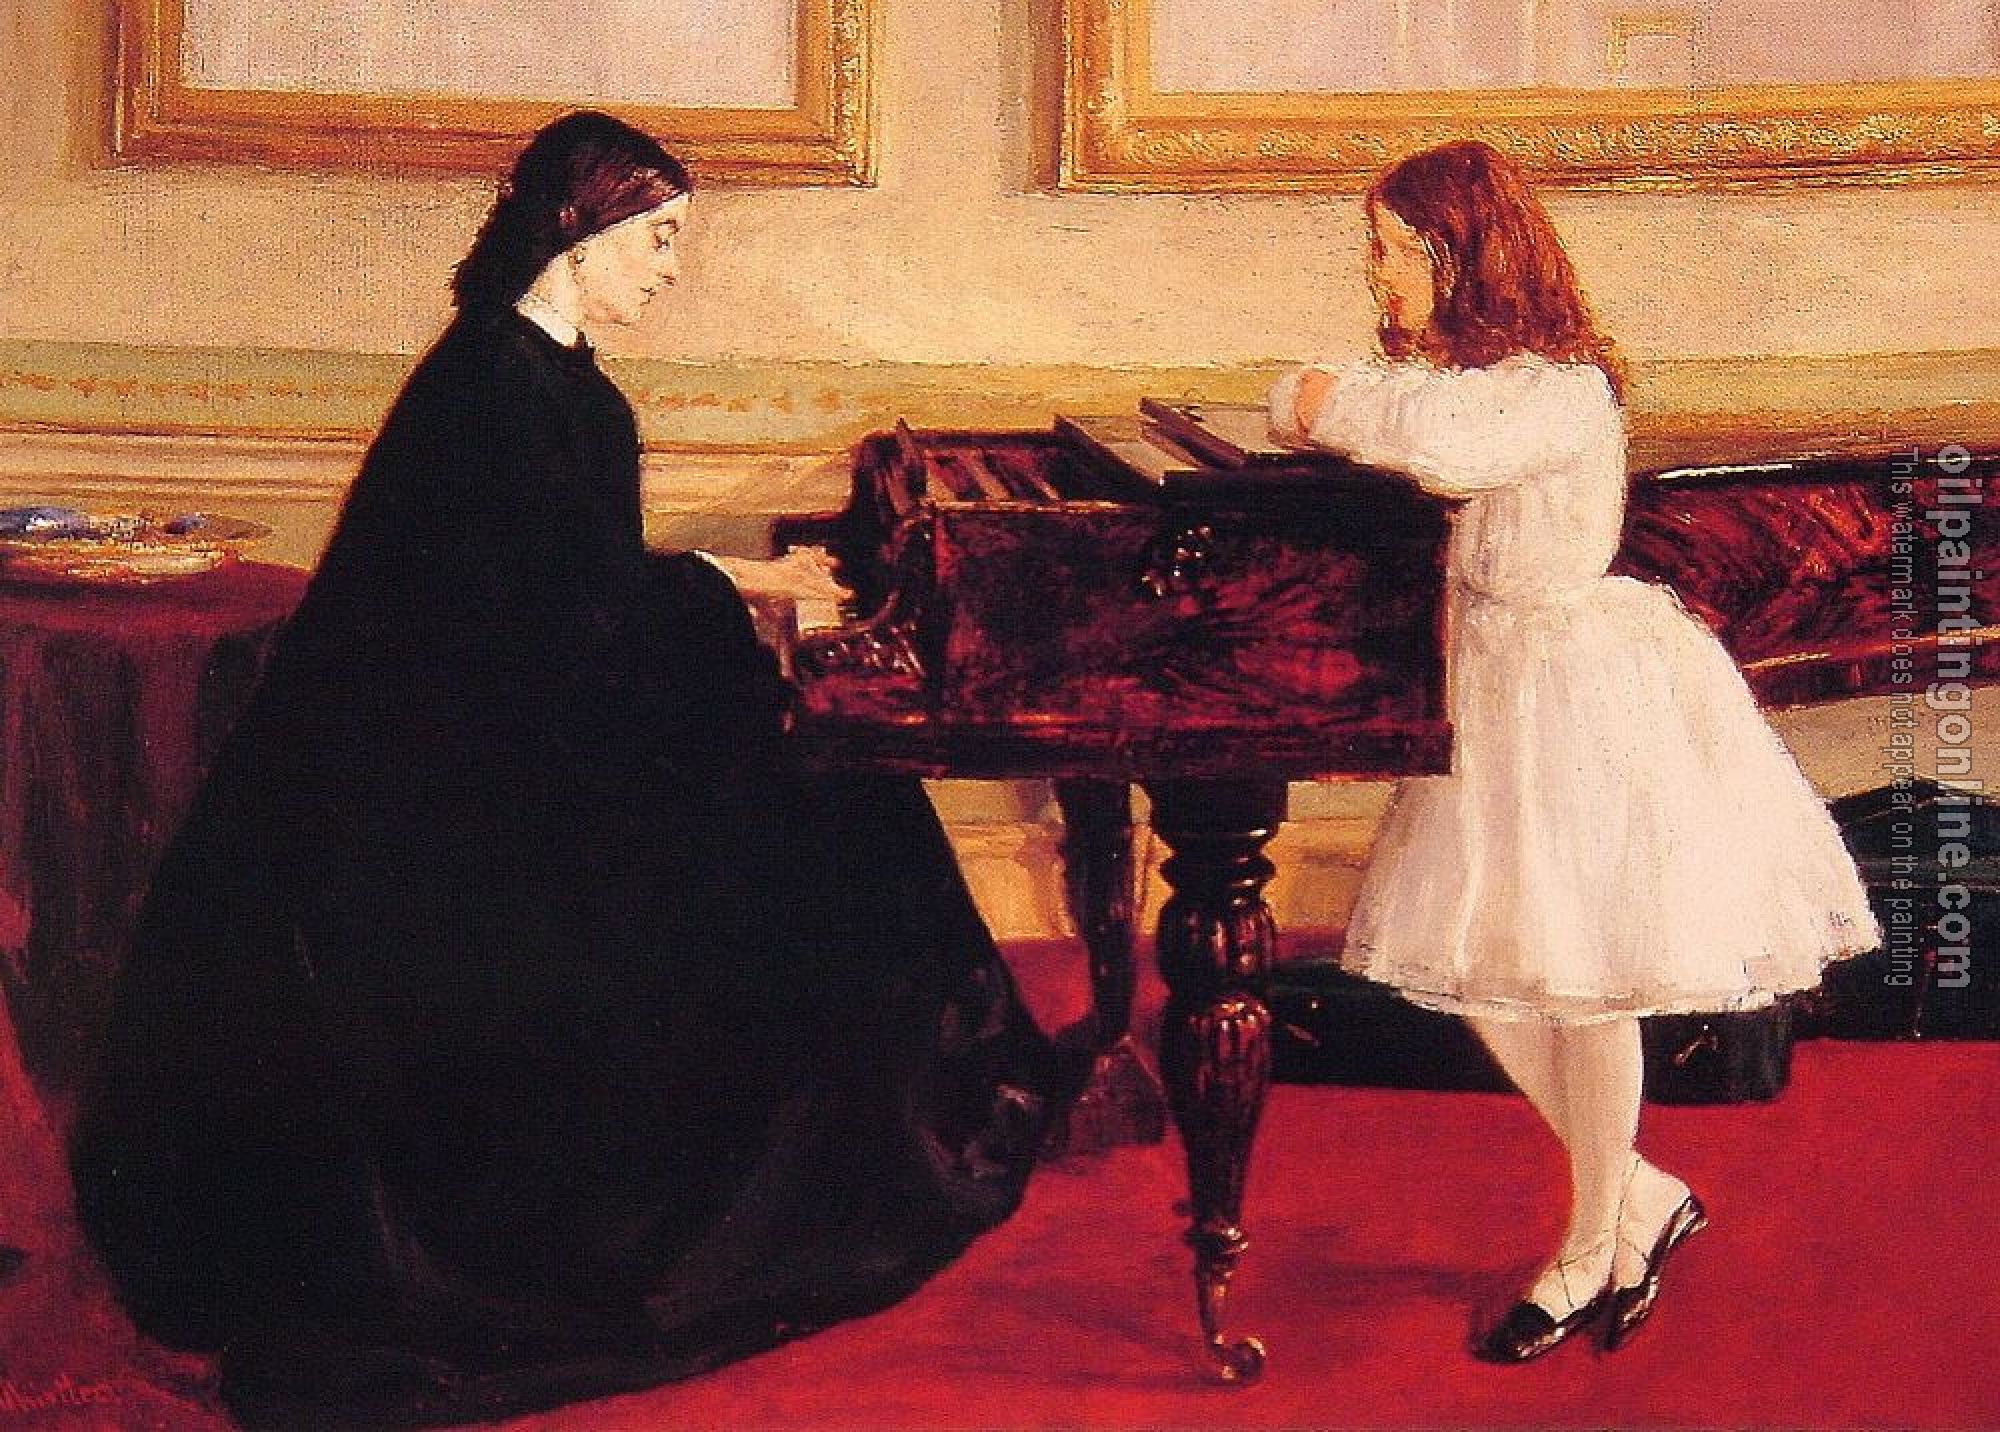 Whistler, James Abbottb McNeill - At the Piano